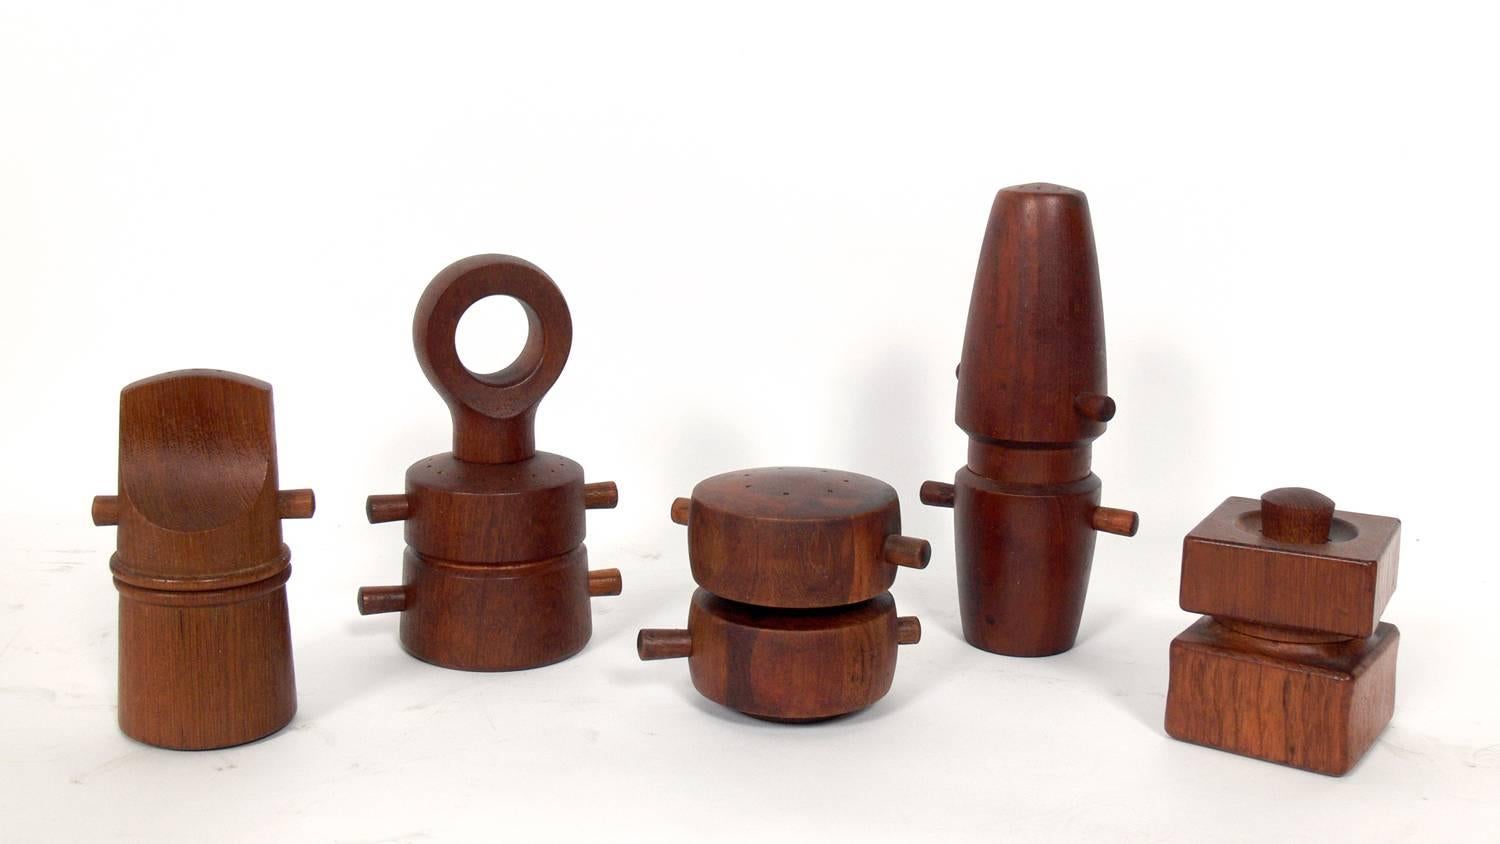 Collection of 20 sculptural Danish modern pepper mills, mostly designed by Jens Quistgaard for Dansk, Danish, circa 1960s. The largest measures 9.25